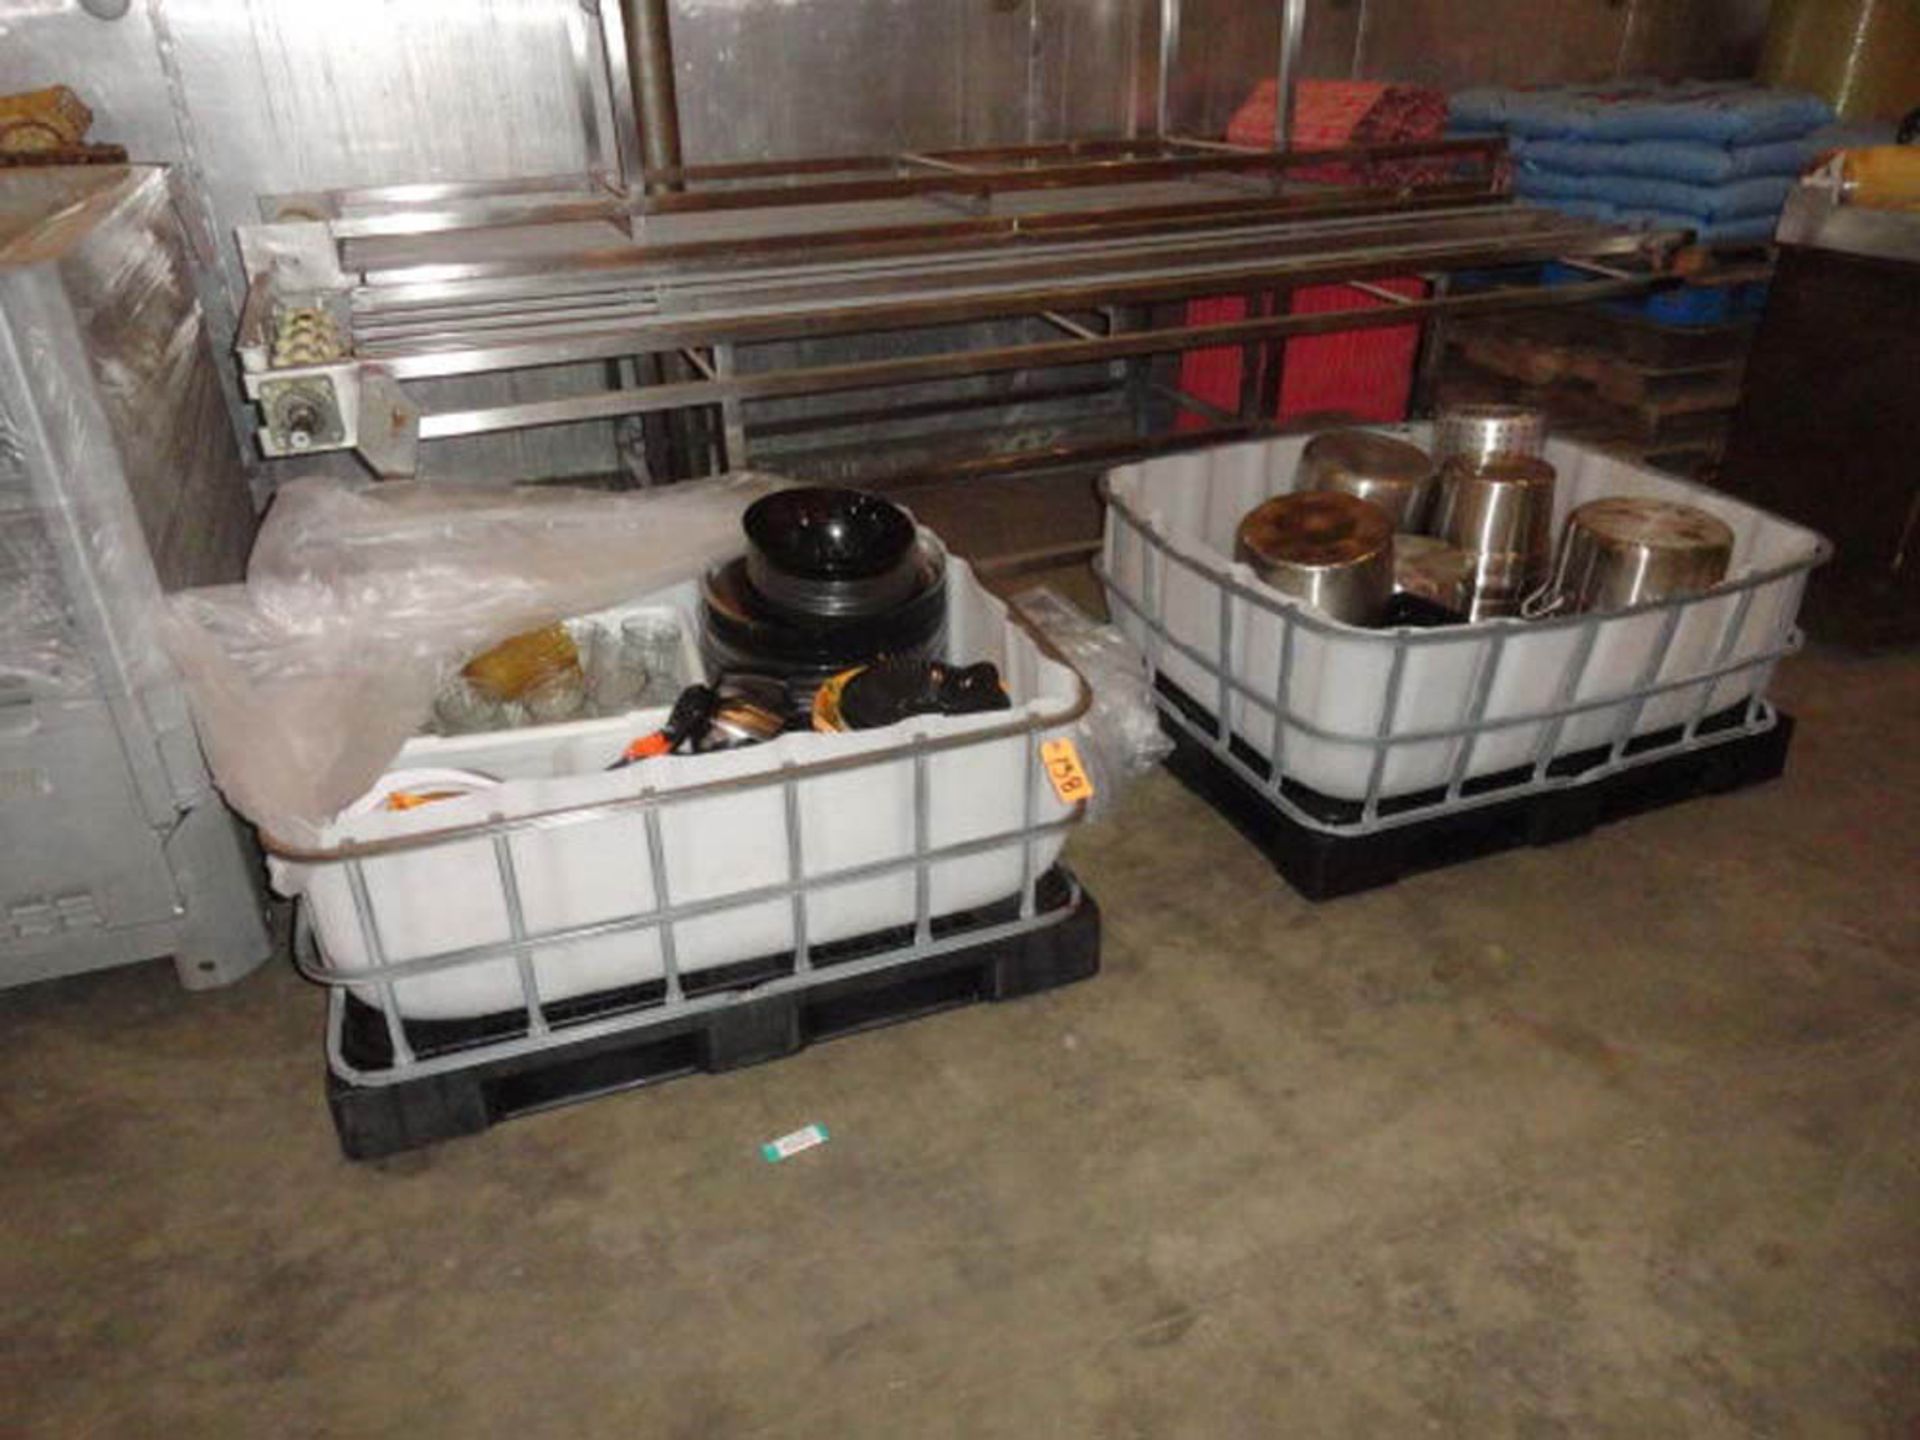 (2) BINS OF SERVING DISHES, KITCHEN POTS AND PANS